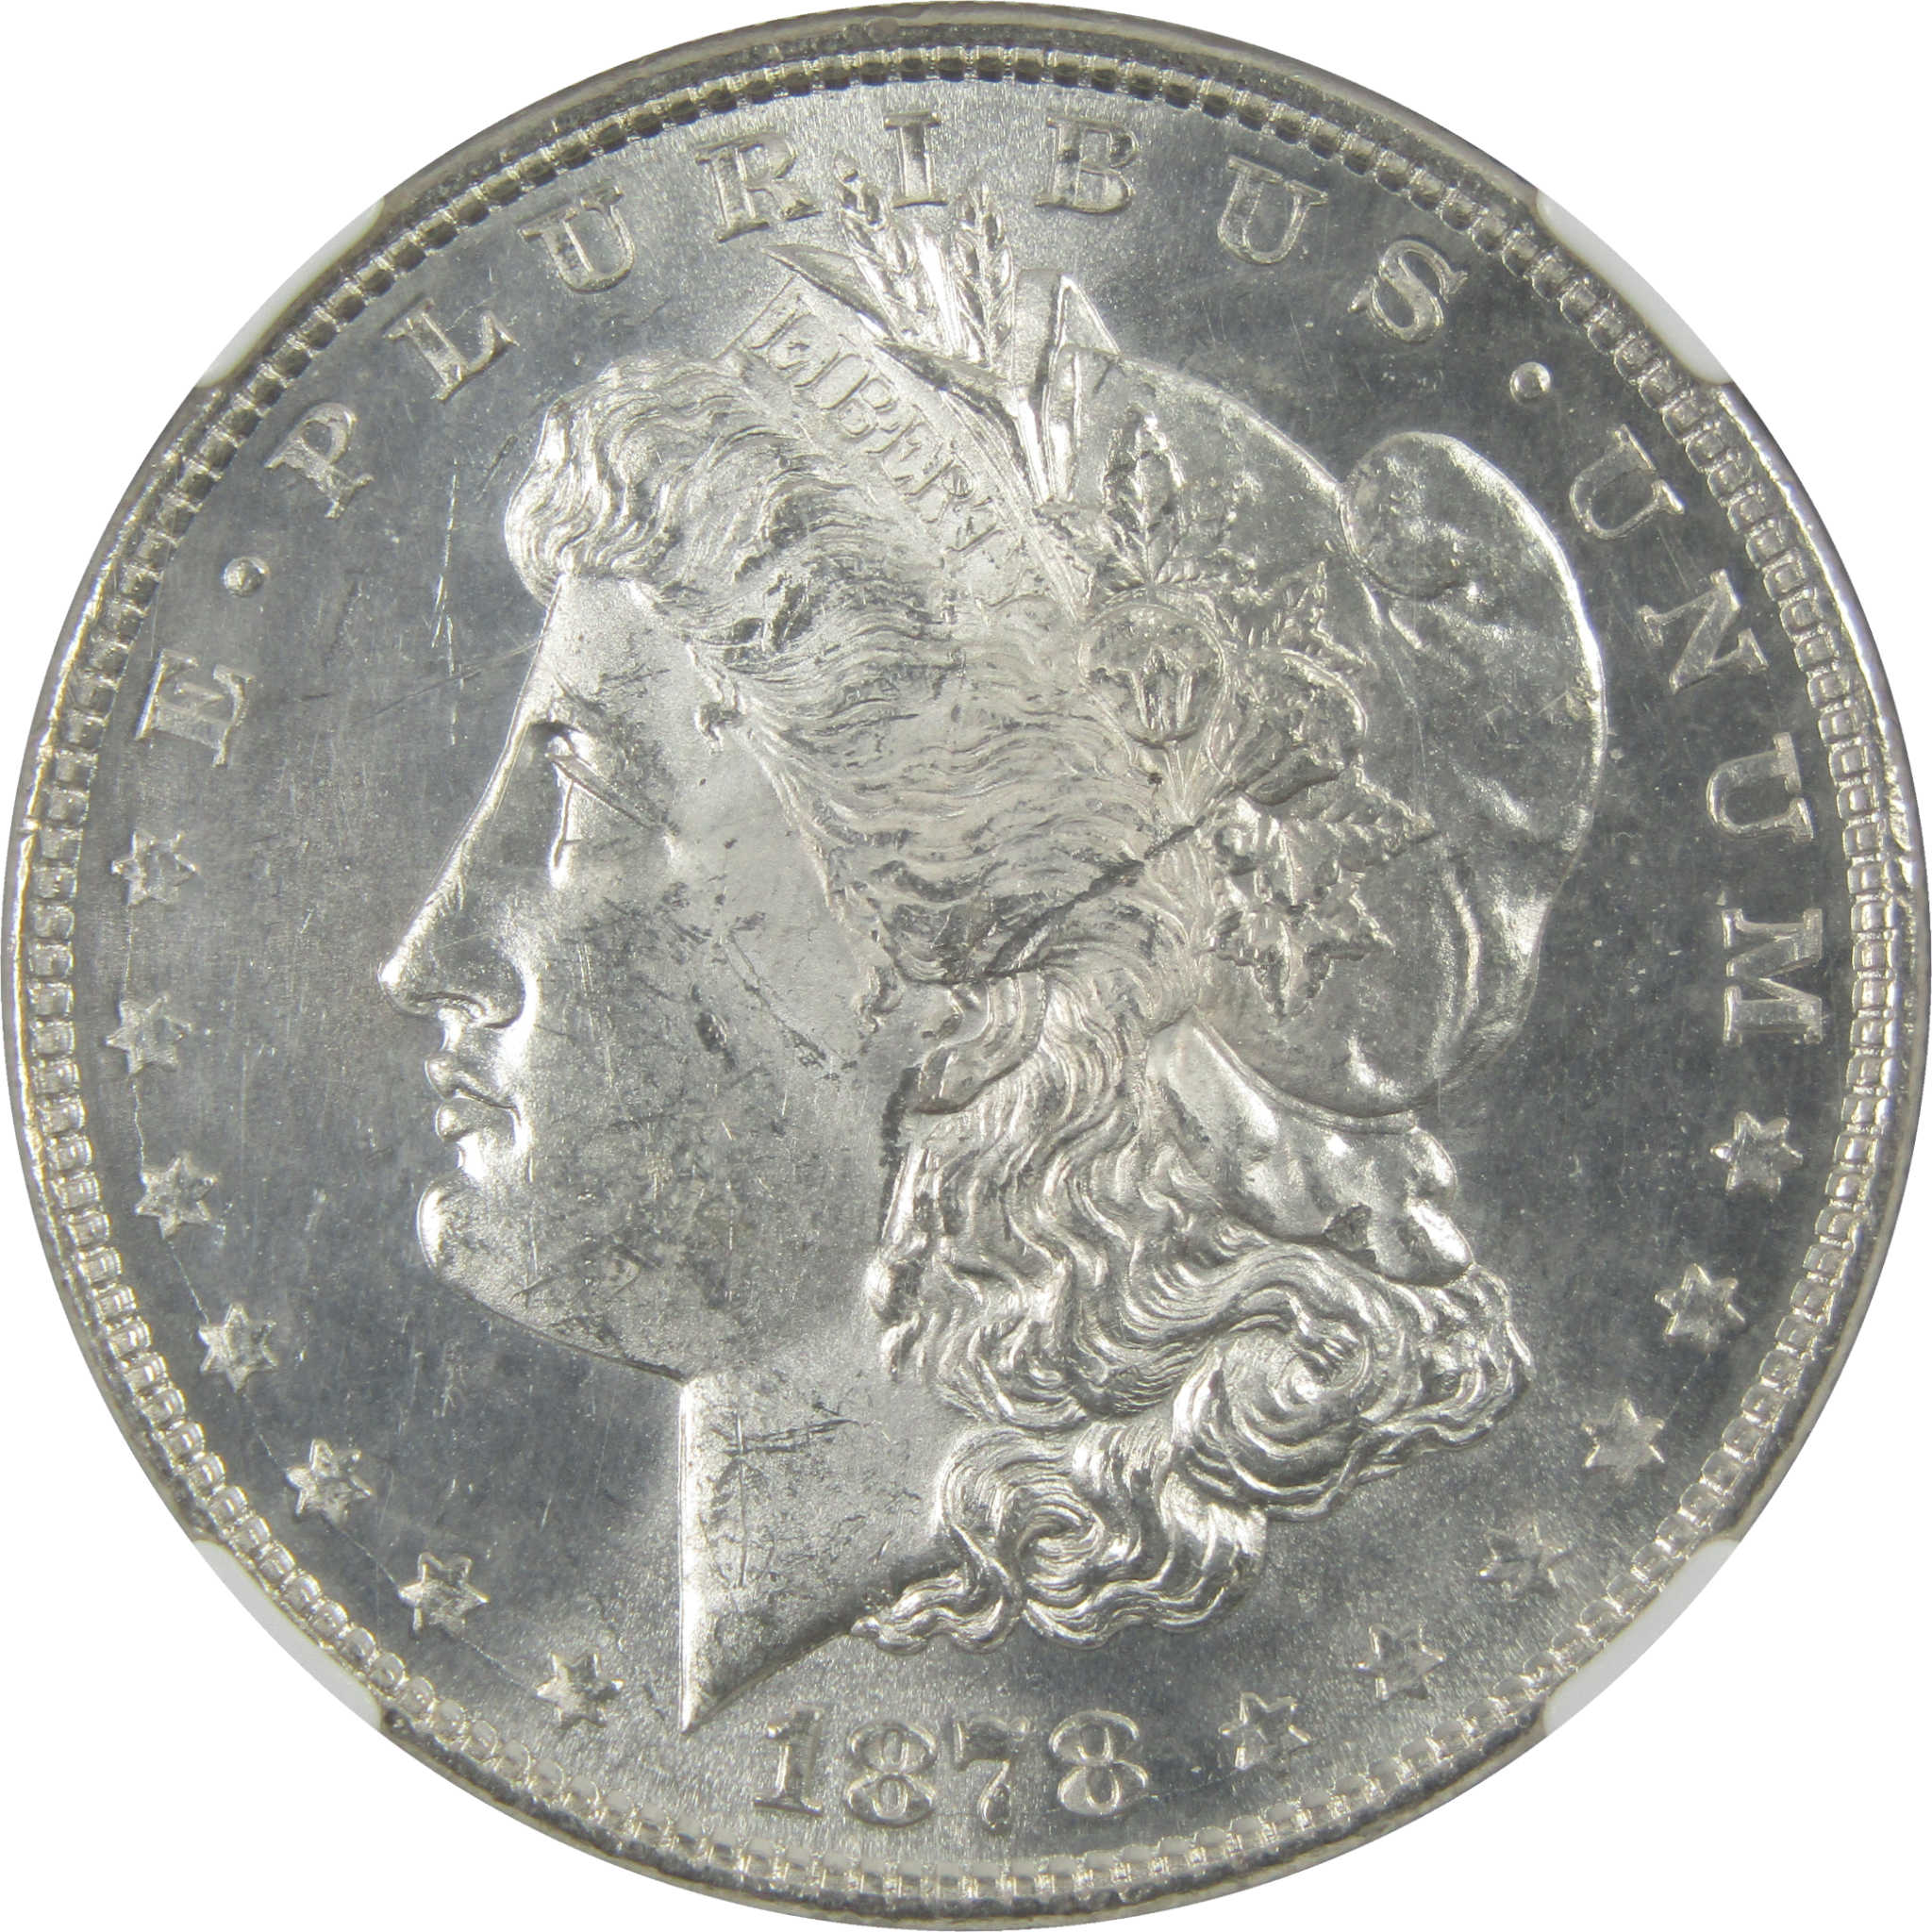 1878 8TF Morgan Dollar MS 62 NGC 90% Silver $1 Uncirculated SKU:I5354 - Morgan coin - Morgan silver dollar - Morgan silver dollar for sale - Profile Coins &amp; Collectibles